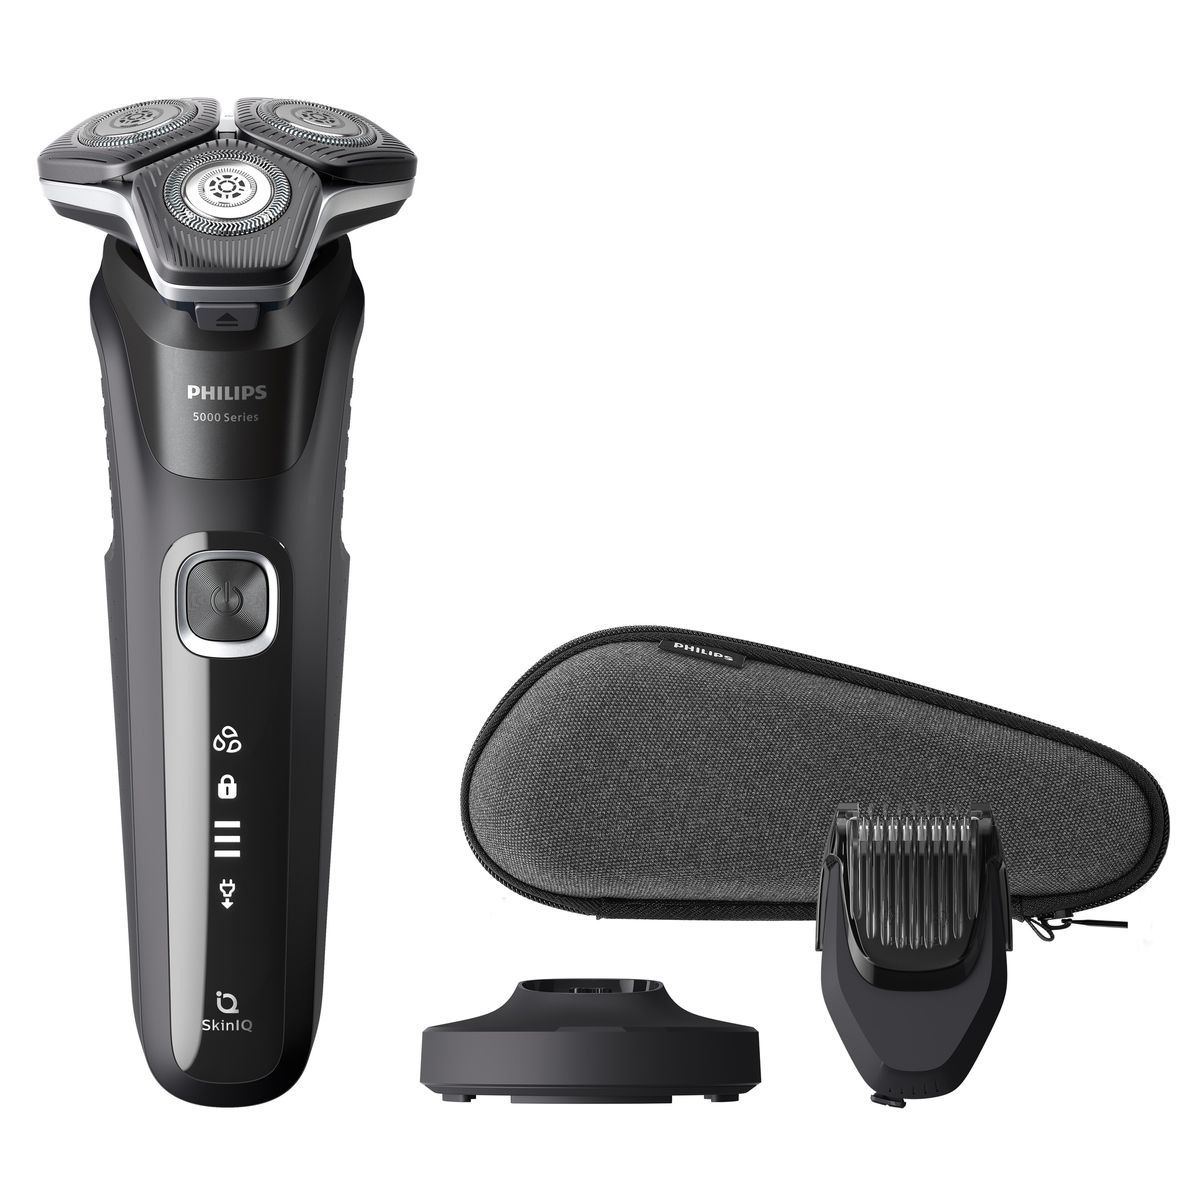 Philips 5000 Series Wet & Dry Electric Shaver with SkinIQ | Shop